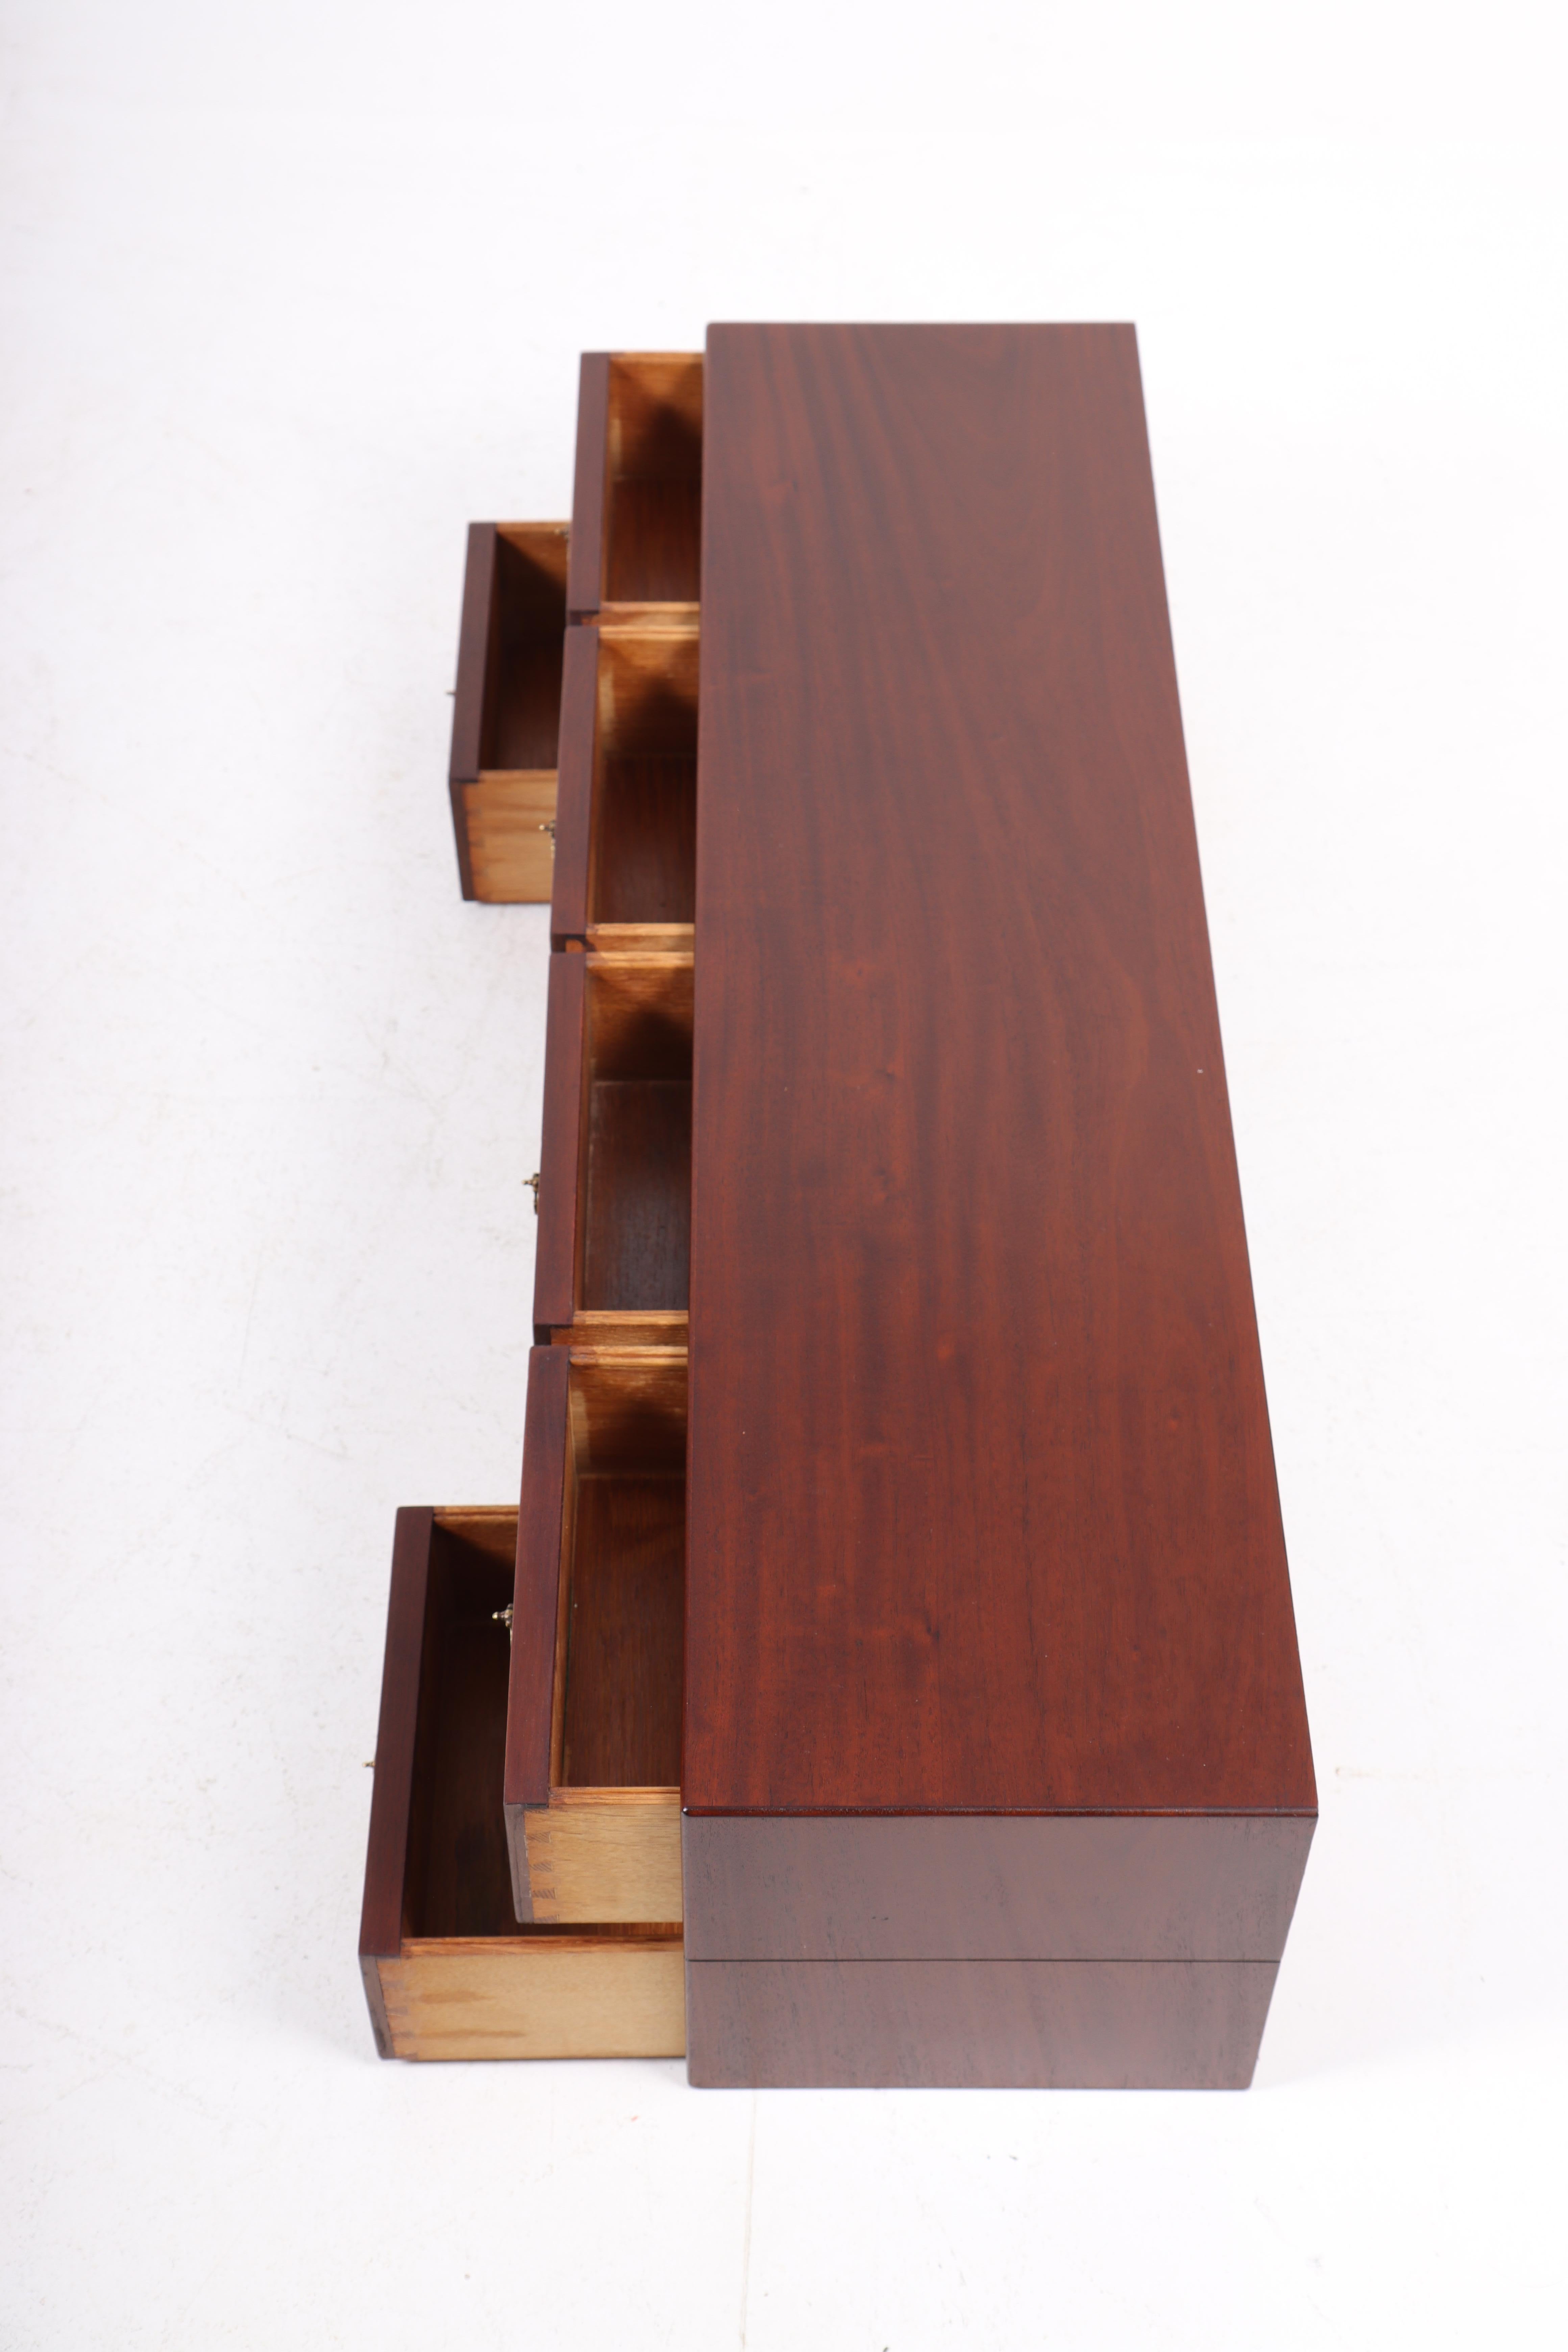 Danish Wall Mounted Console Table in Mahogany Designed by Frits Heningsen, 1940s